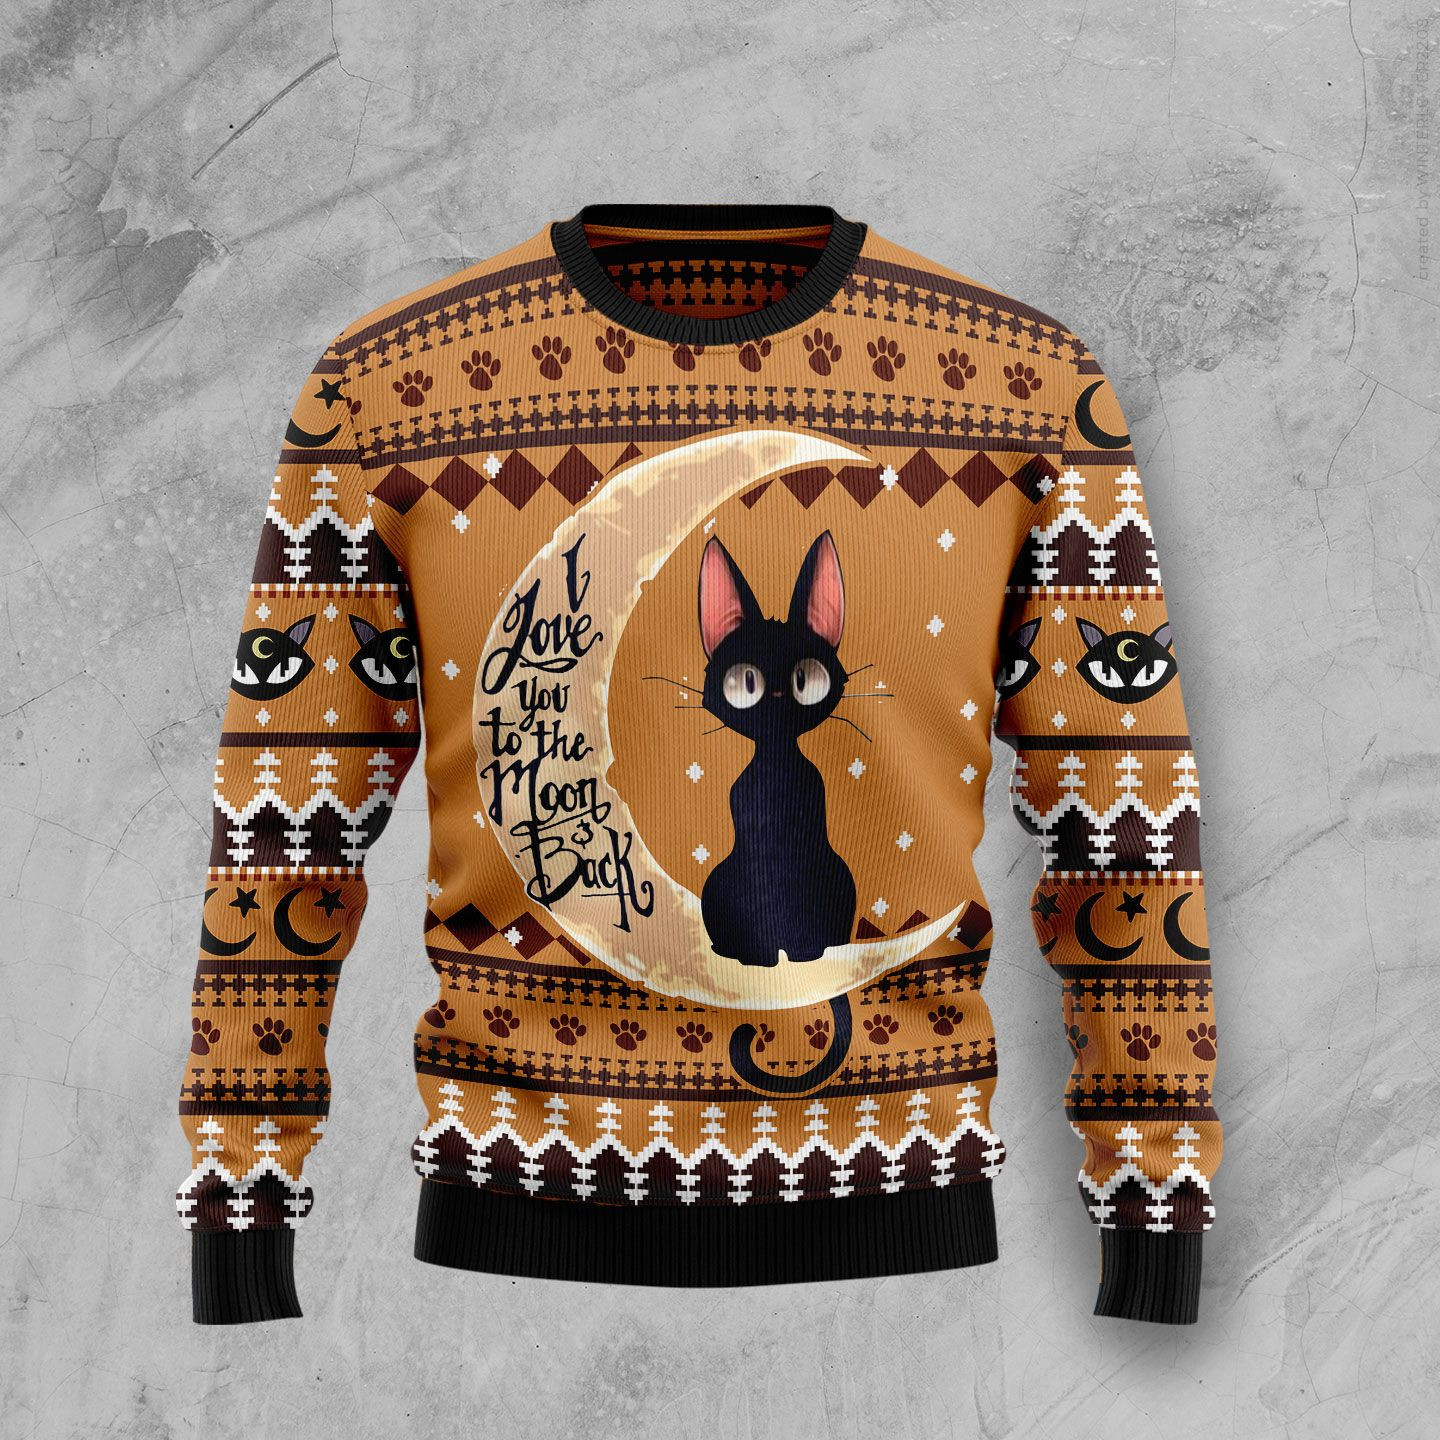 Black Cat Moon And Back Ugly Christmas Sweater Ugly Sweater For Men Women, Holiday Sweater